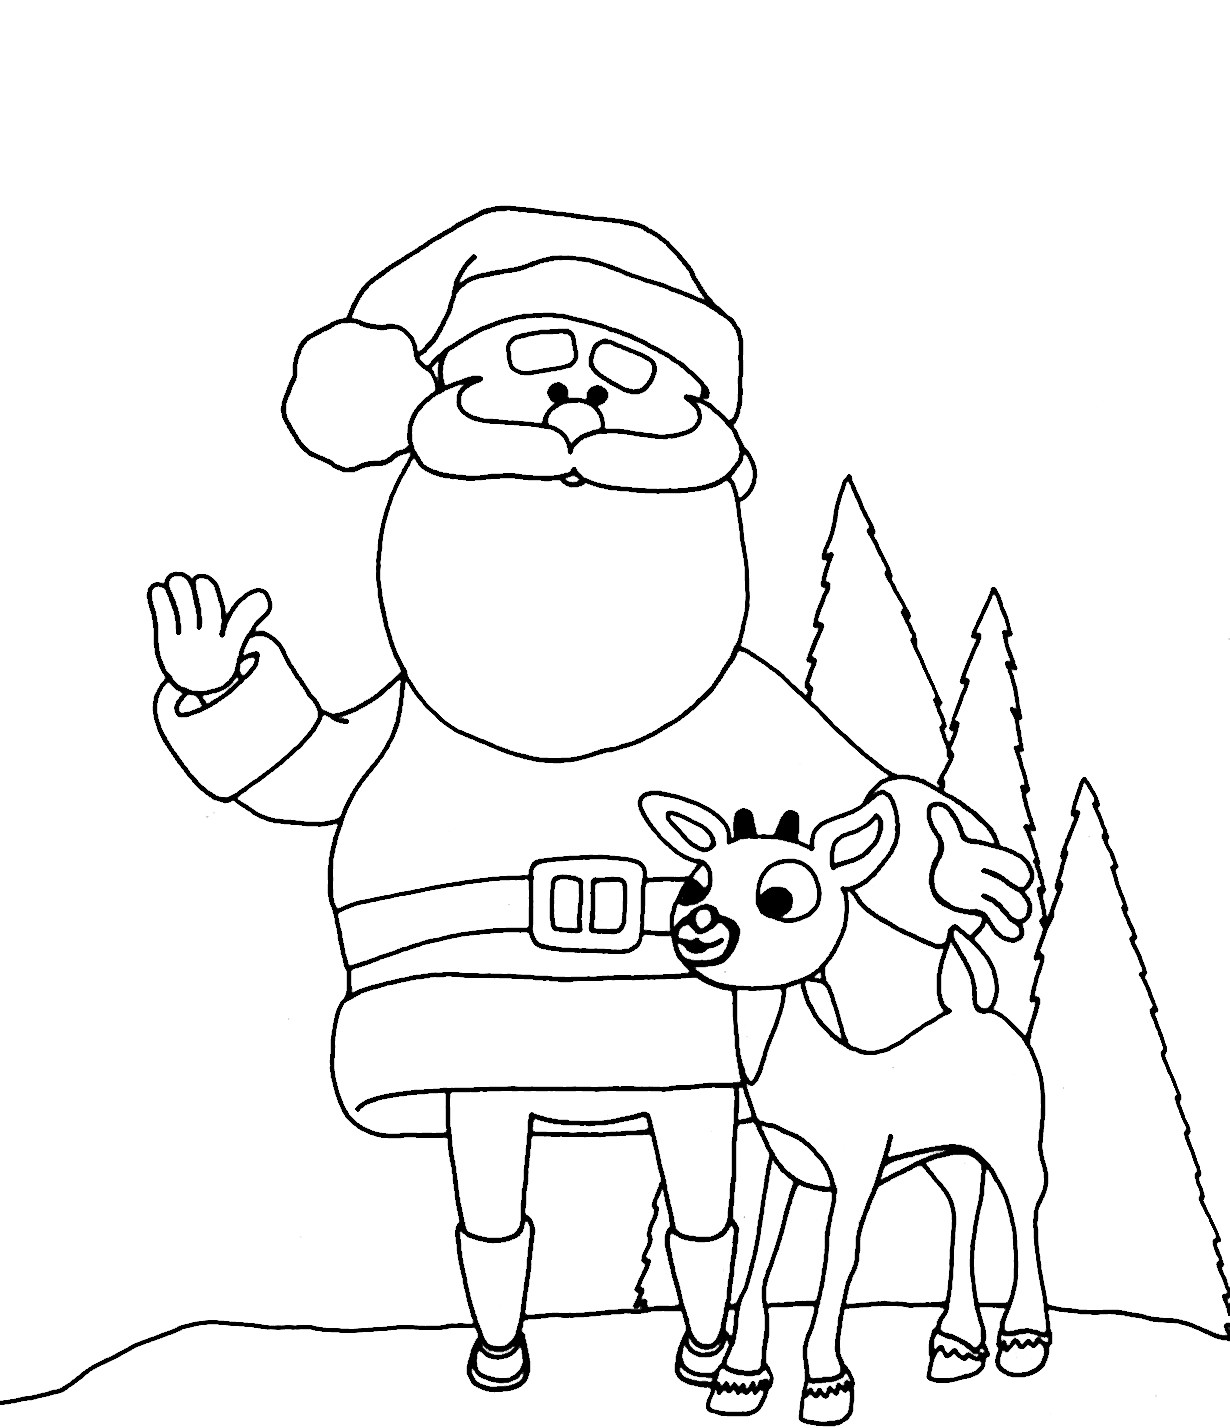 Santa Claus Coloring Pages Free Printables
 Yucca Flats N M Wenchkin s Coloring Pages Rankin Bass